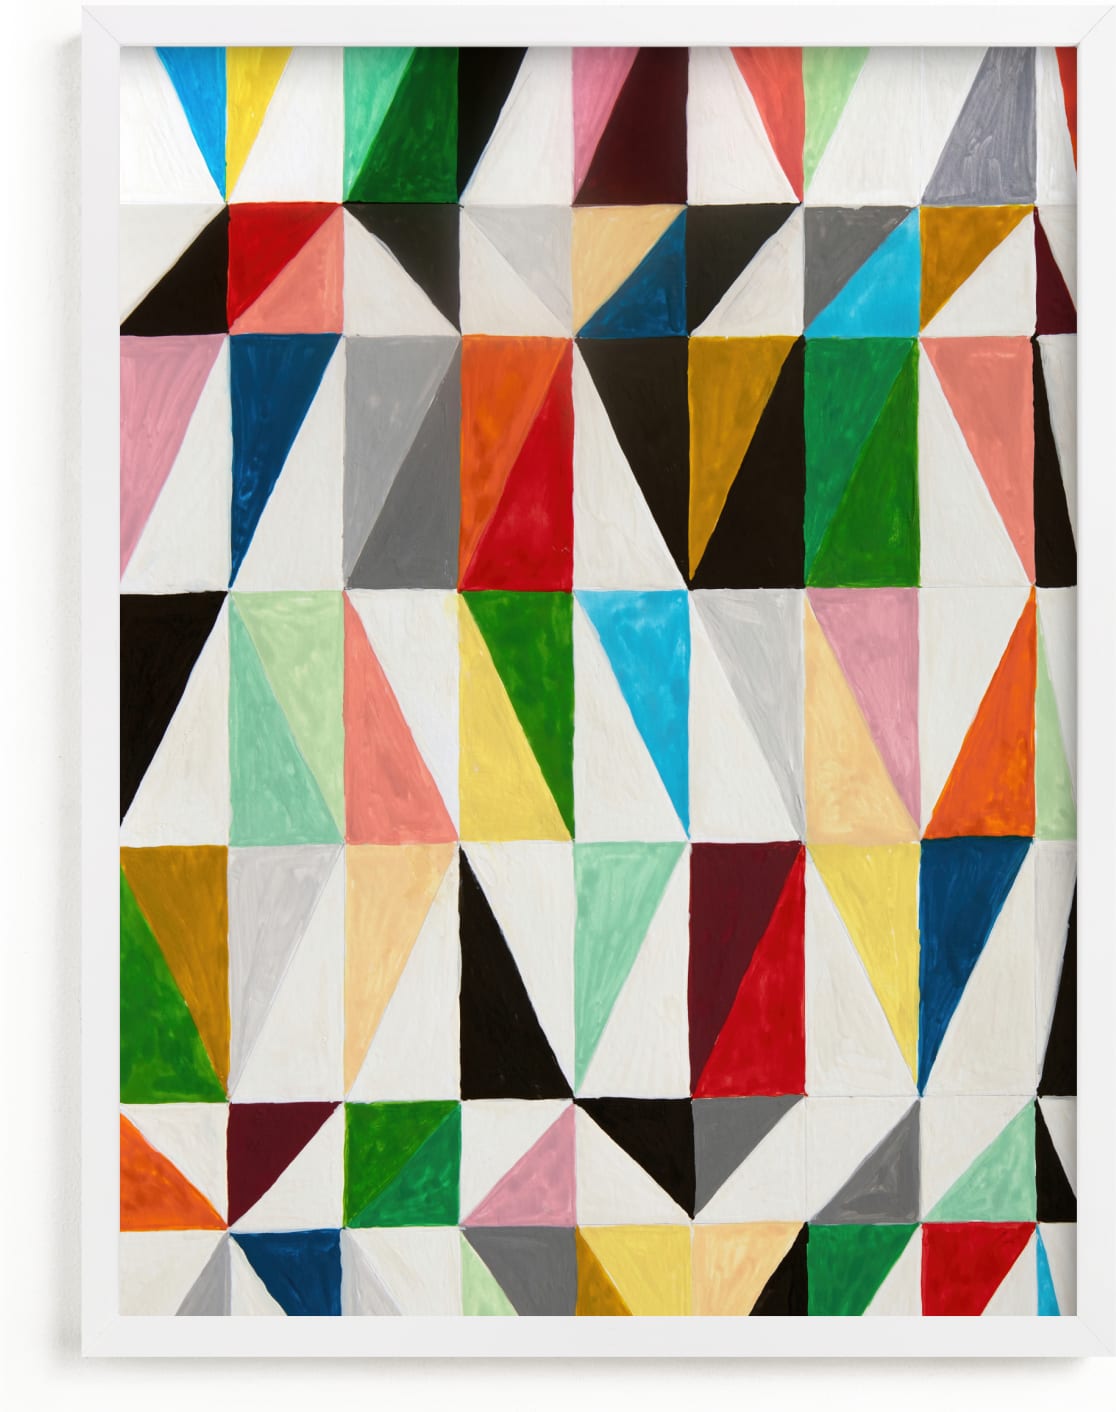 This is a classic colors kids wall art by Jane Clark called Triangle Grid.